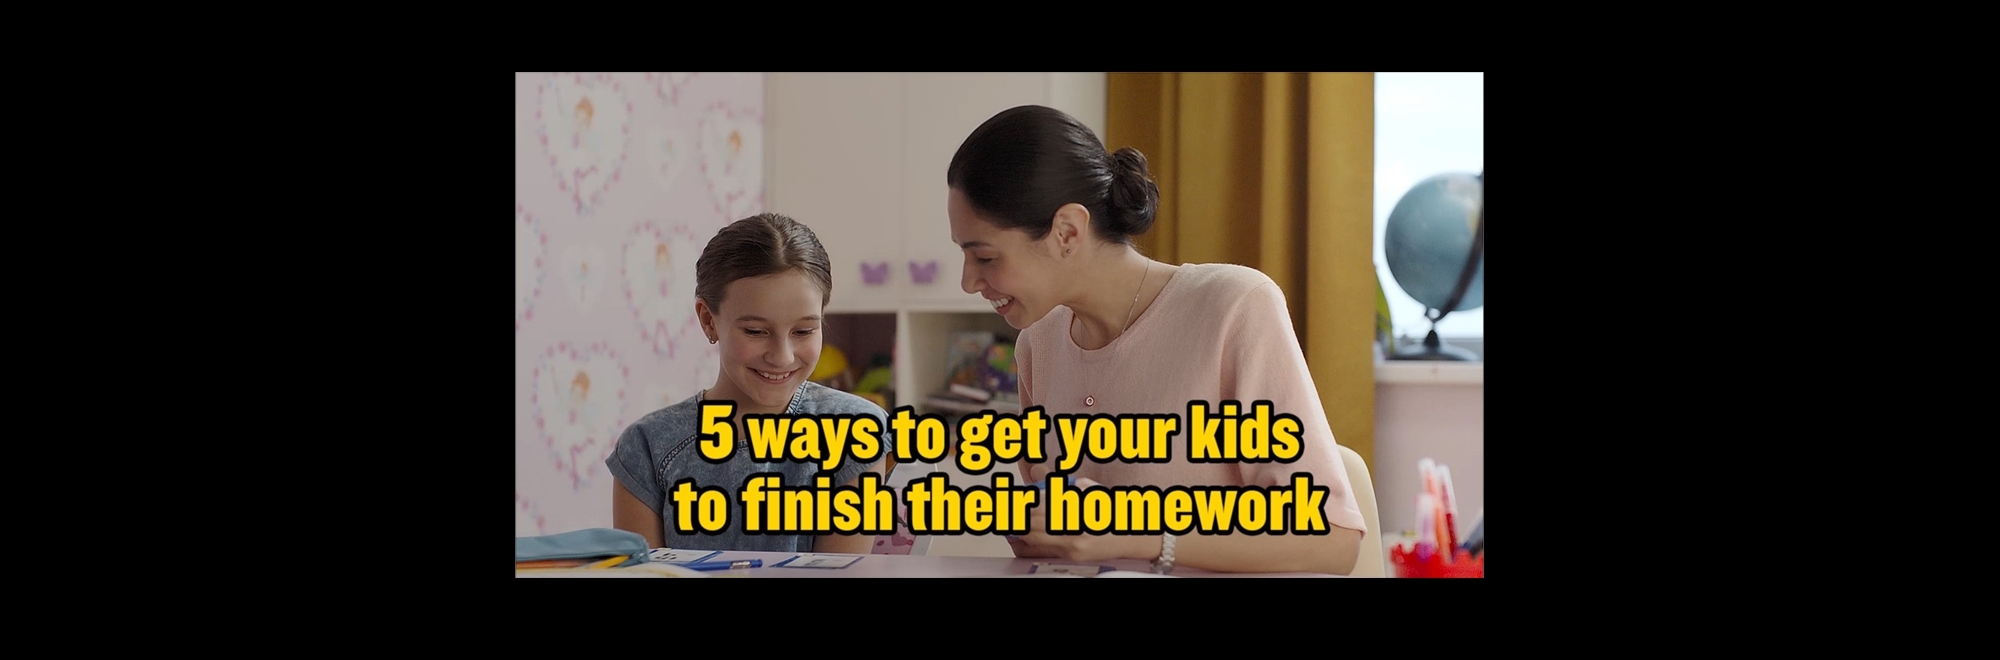 A powerful film from UNICEF shows the brutal reality of home-schooling for many children